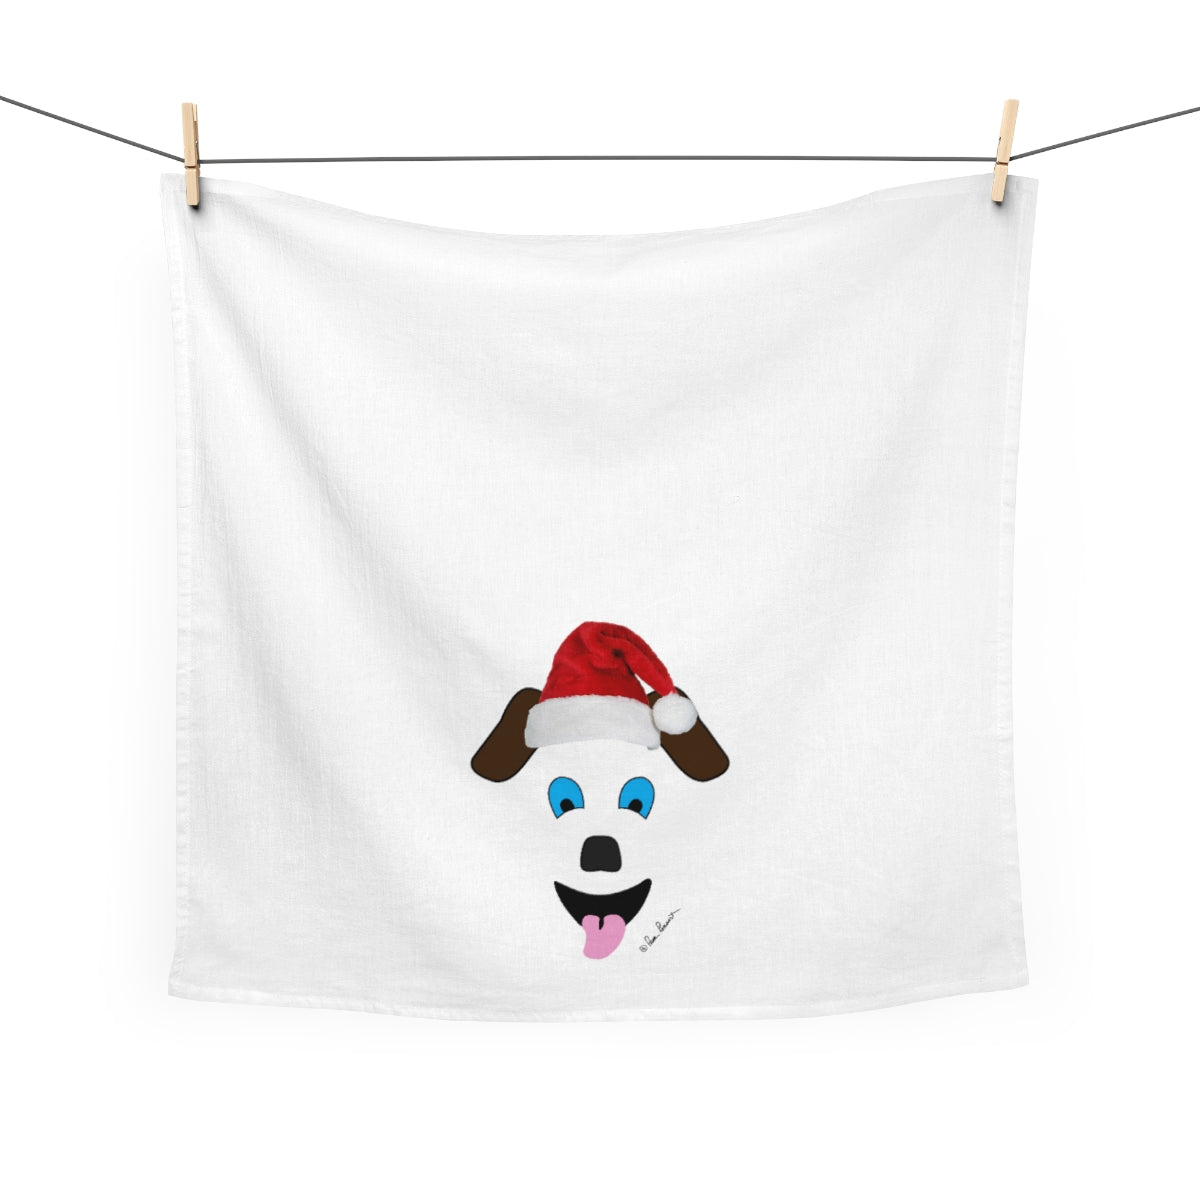 Mock up of the kitchen towel hanging from clothes pins